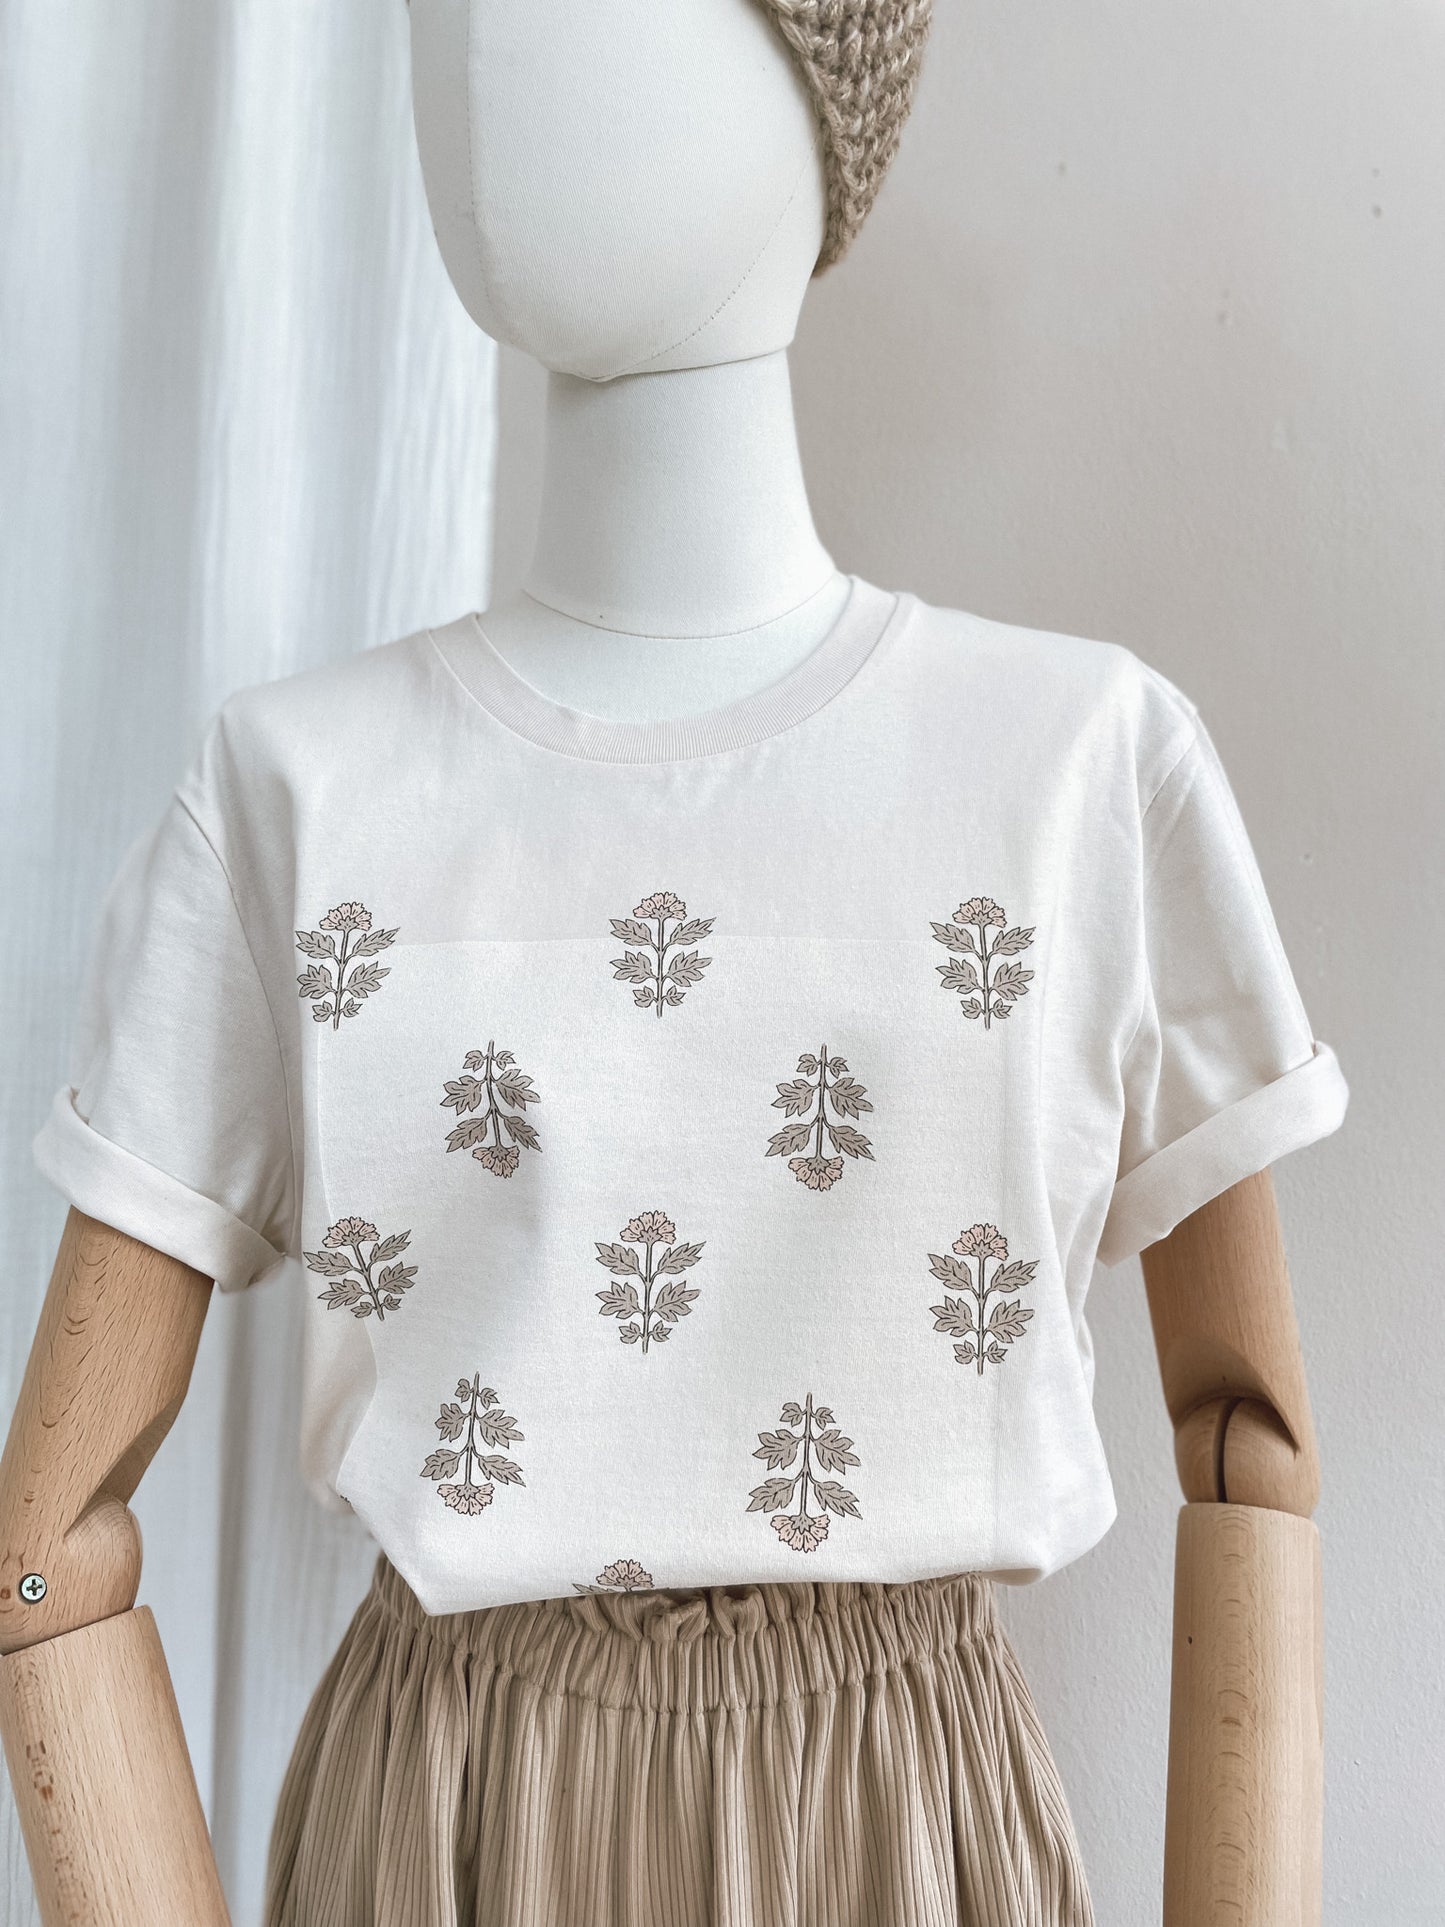 T-shirt / Just flowers / vintage white